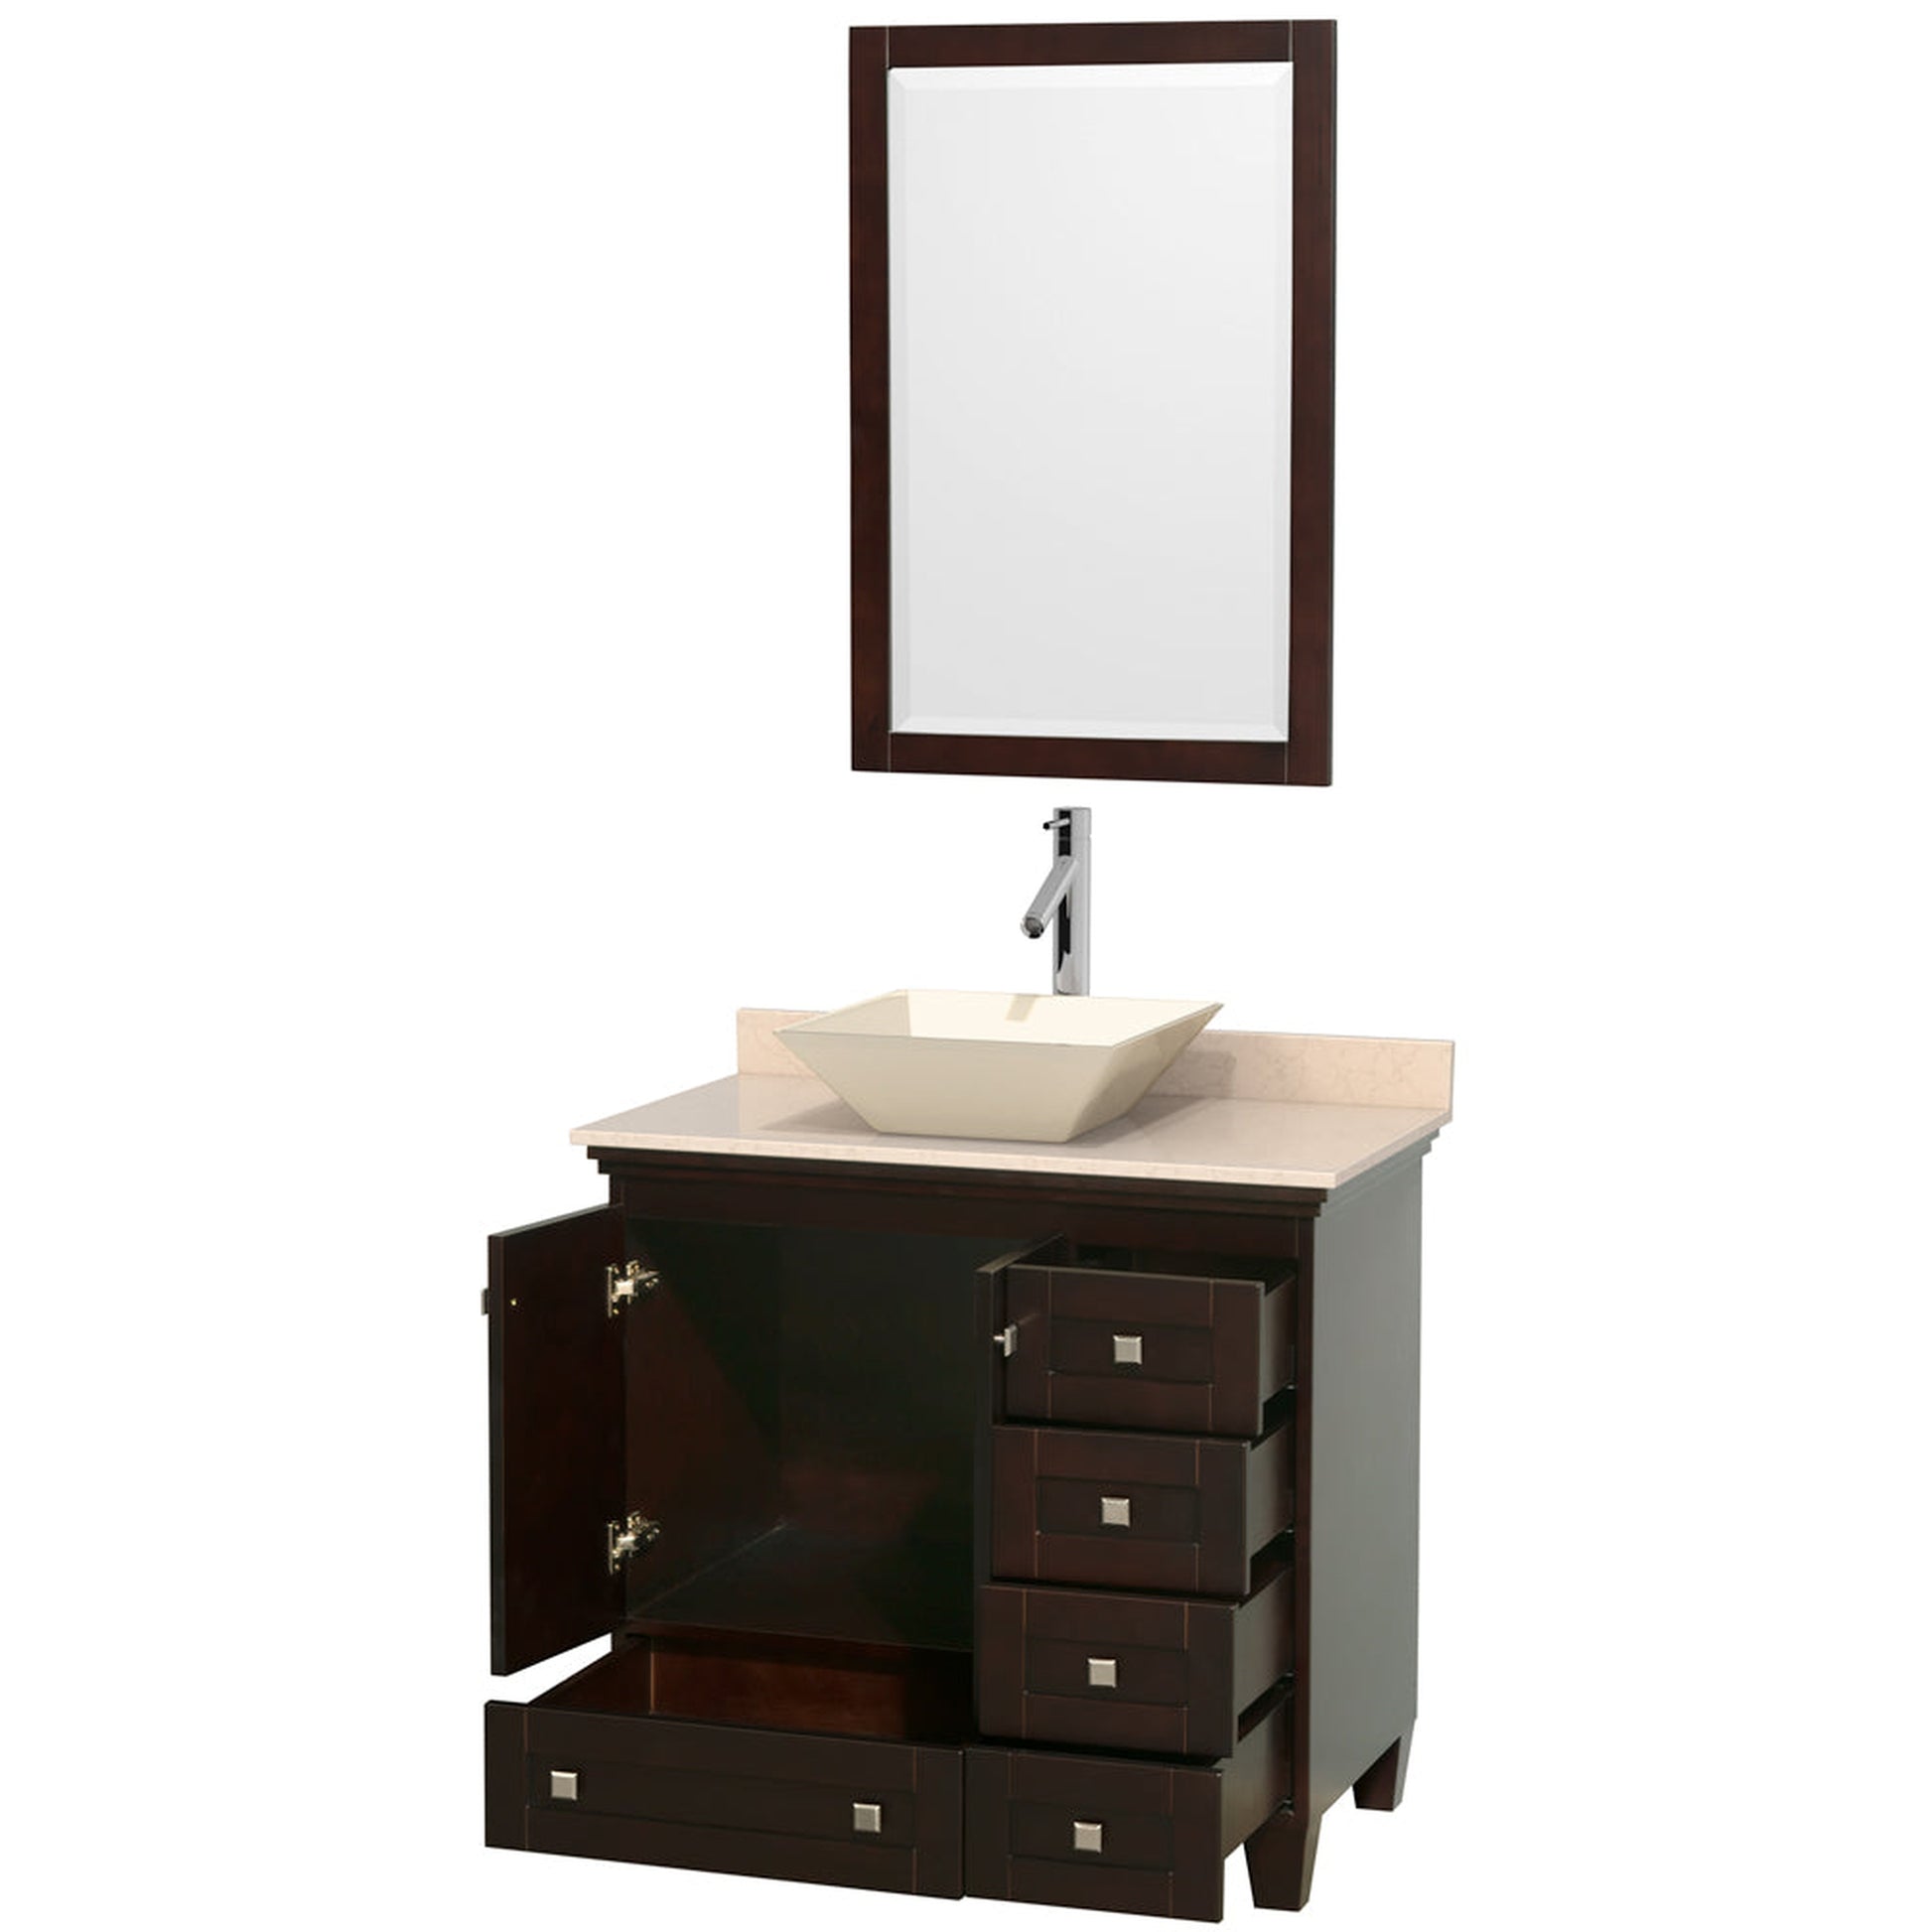 Wyndham Collection Acclaim 36" Single Bathroom Vanity in Espresso With Ivory Marble Countertop, Pyra Bone Porcelain Sink & 24" Mirror